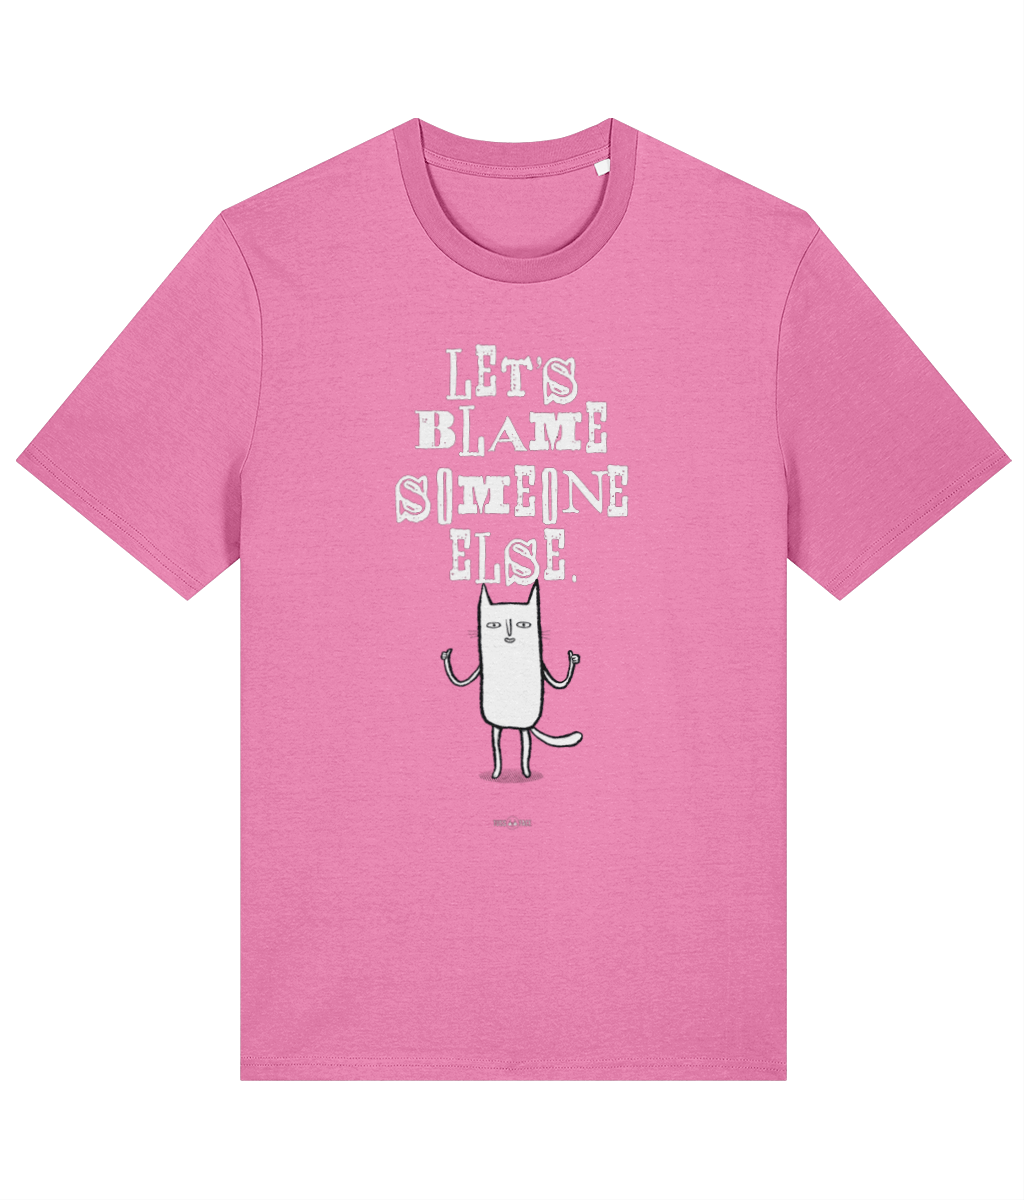 Let's Blame Someone Else - TussFace T-shirt